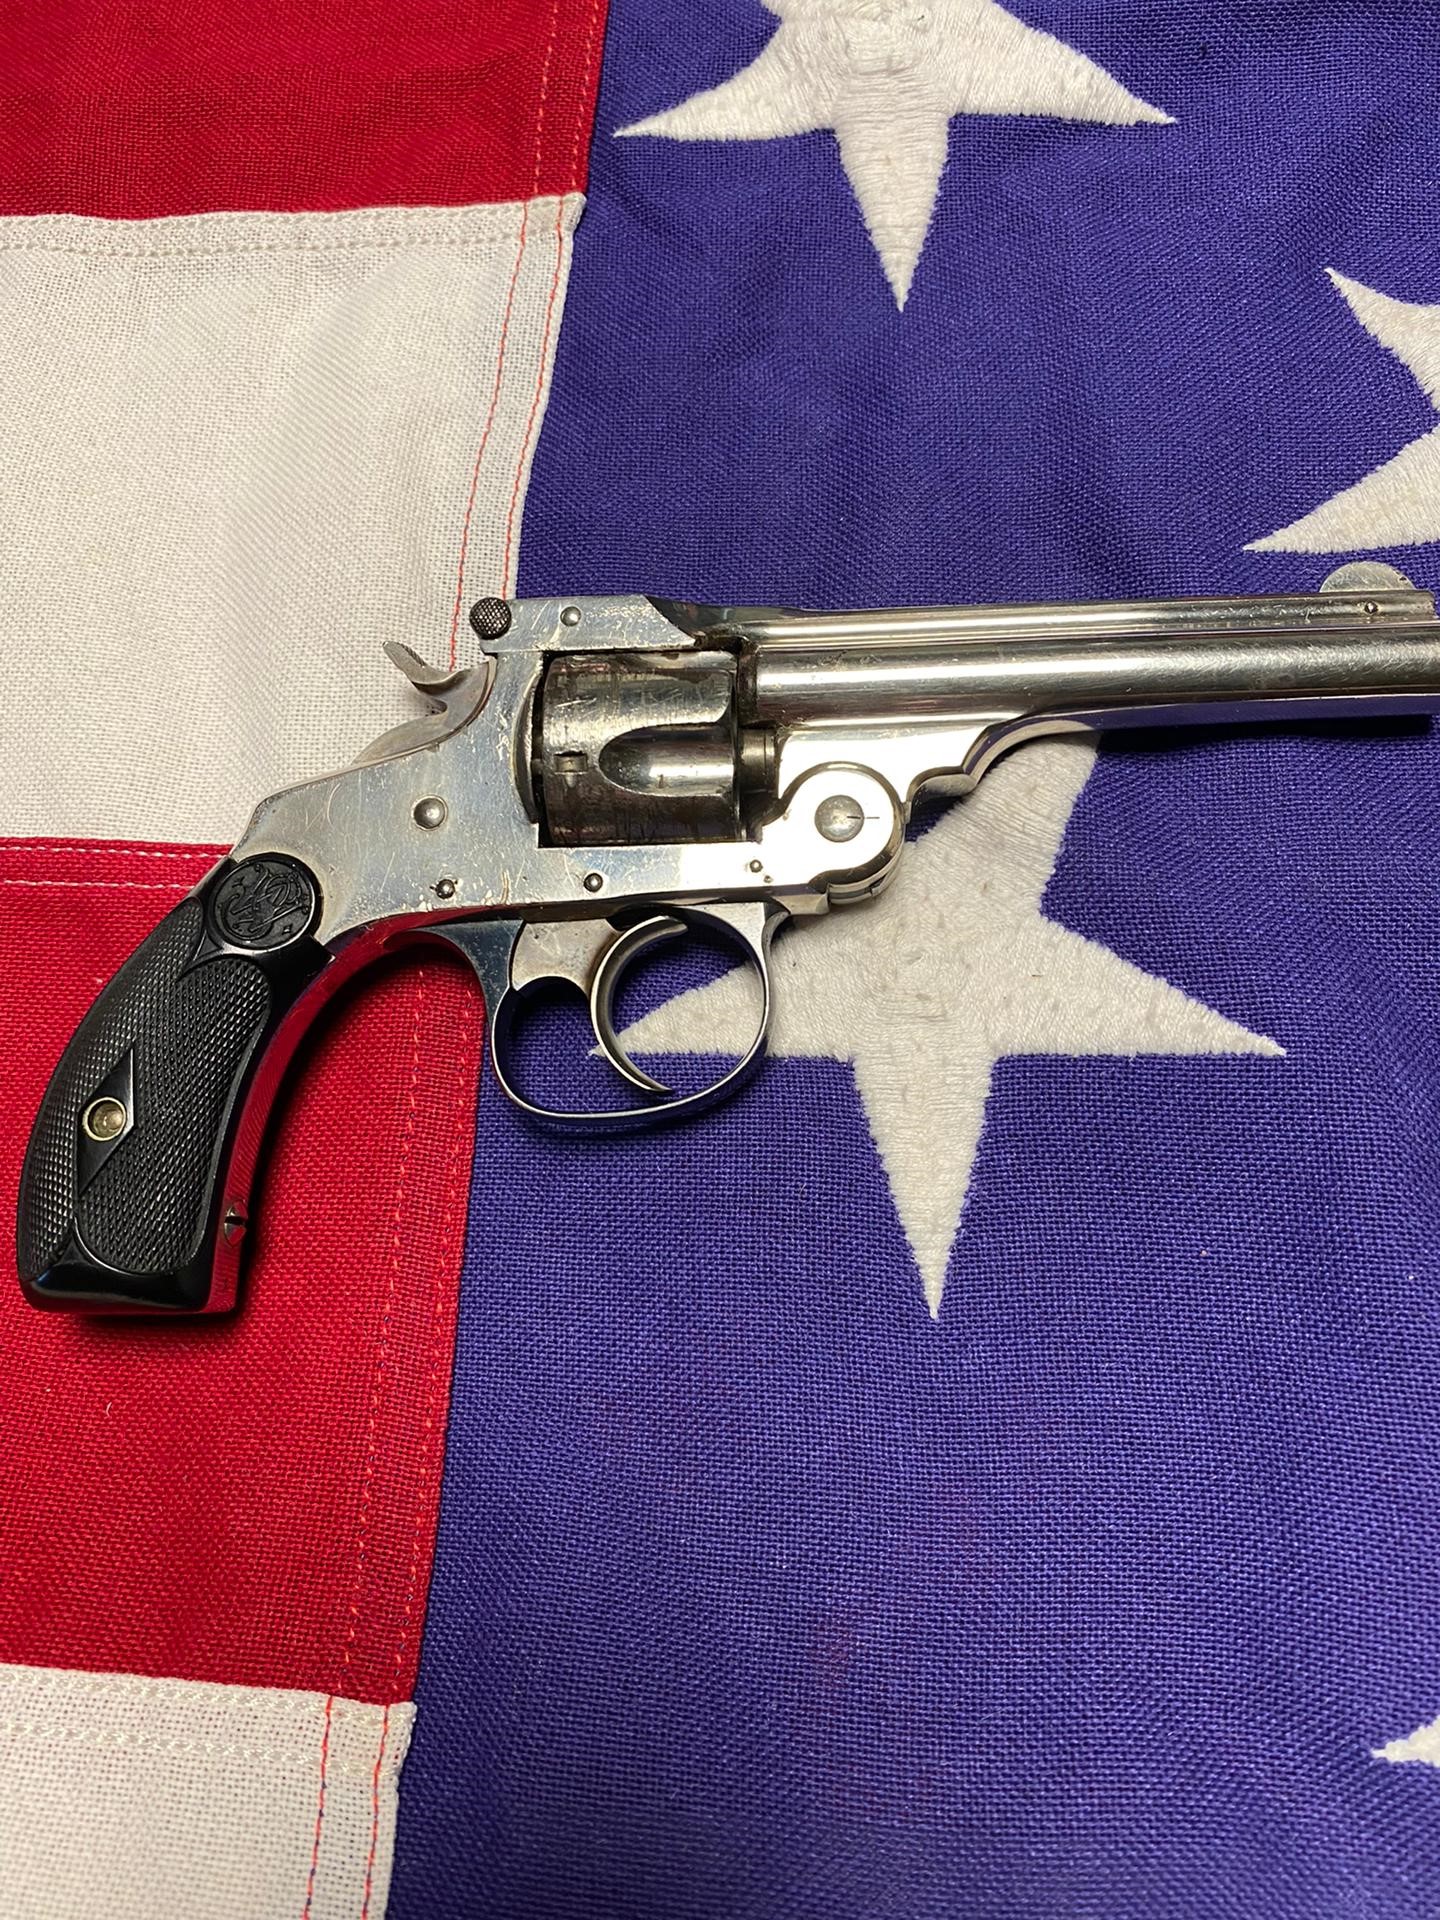 Smith & Wesson Fourth model double action, cal .32S&W